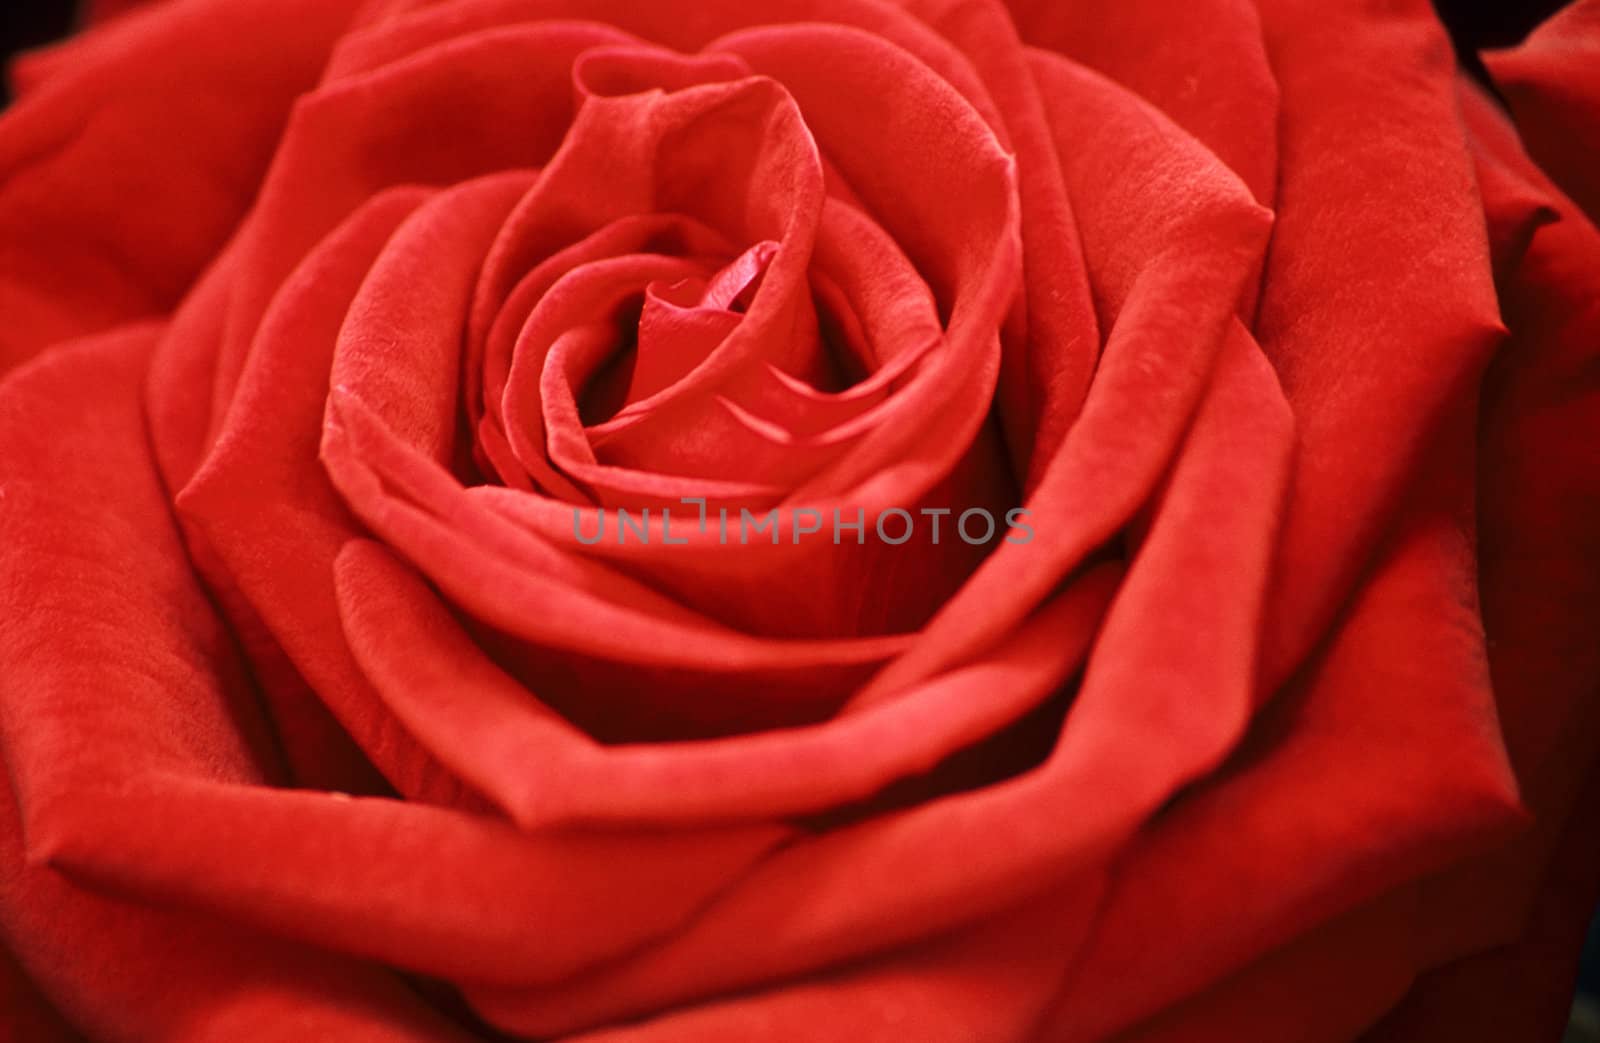 A close up of a perfect red rose with a shallow depth of field.